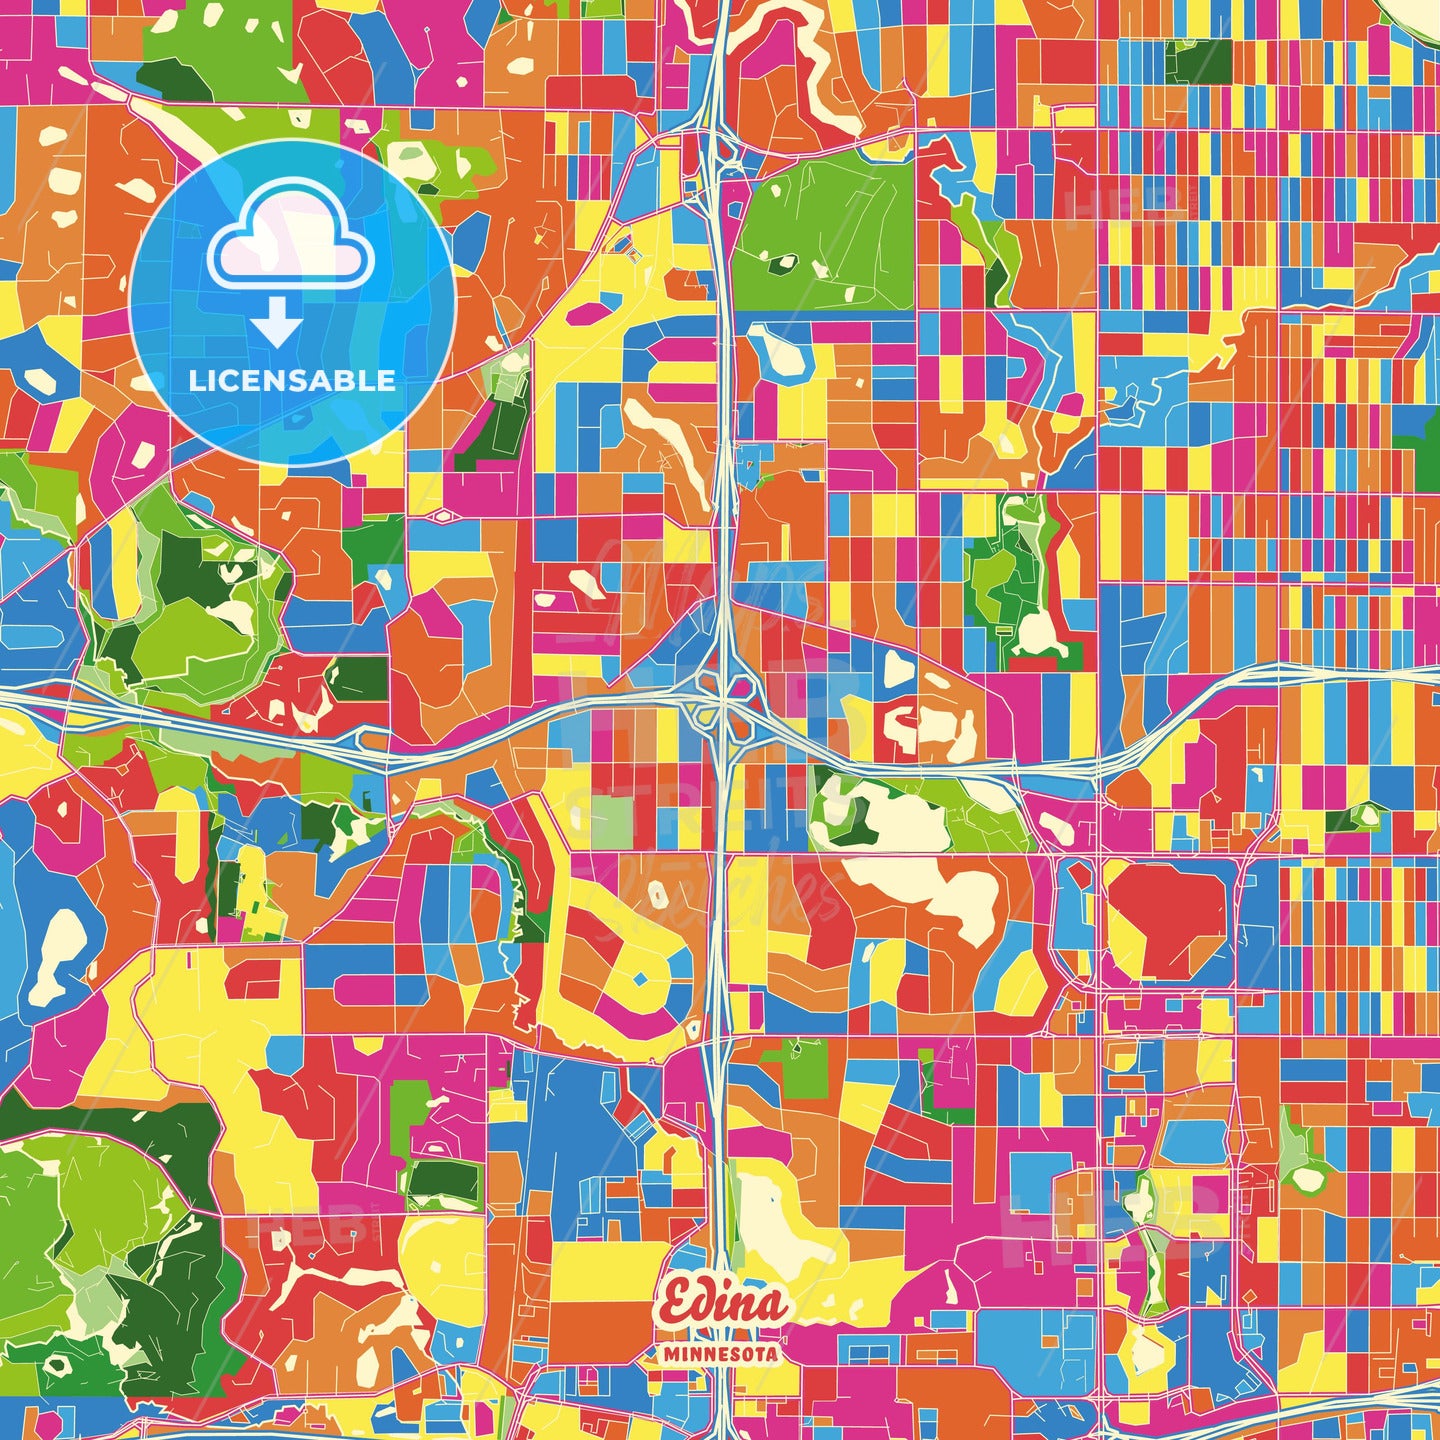 Edina, United States Crazy Colorful Street Map Poster Template - HEBSTREITS Sketches